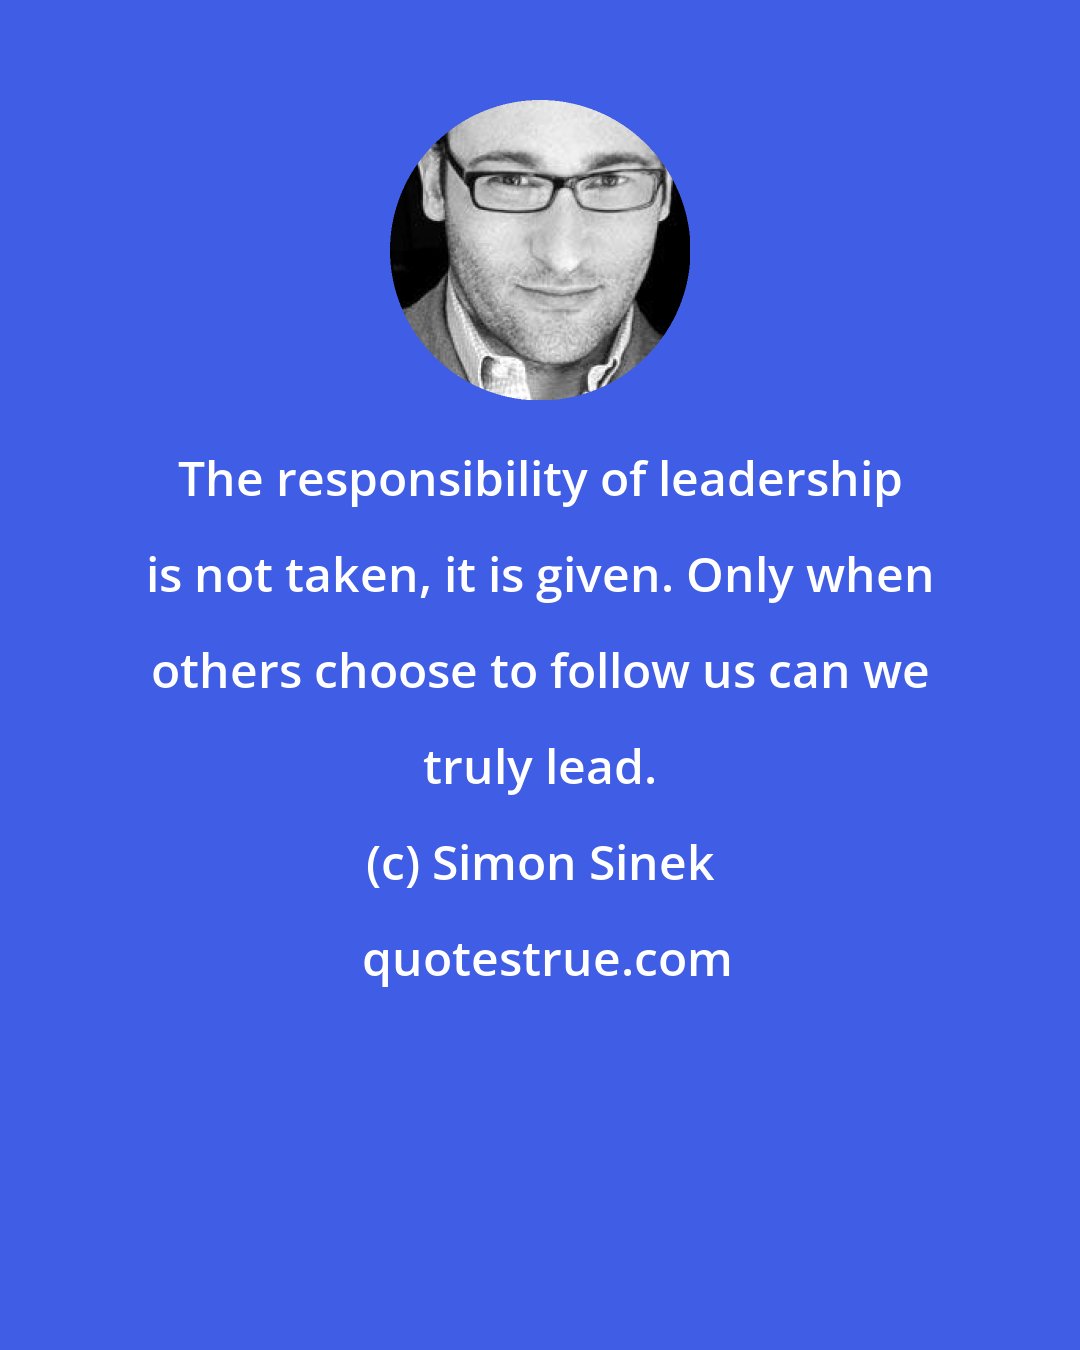 Simon Sinek: The responsibility of leadership is not taken, it is given. Only when others choose to follow us can we truly lead.